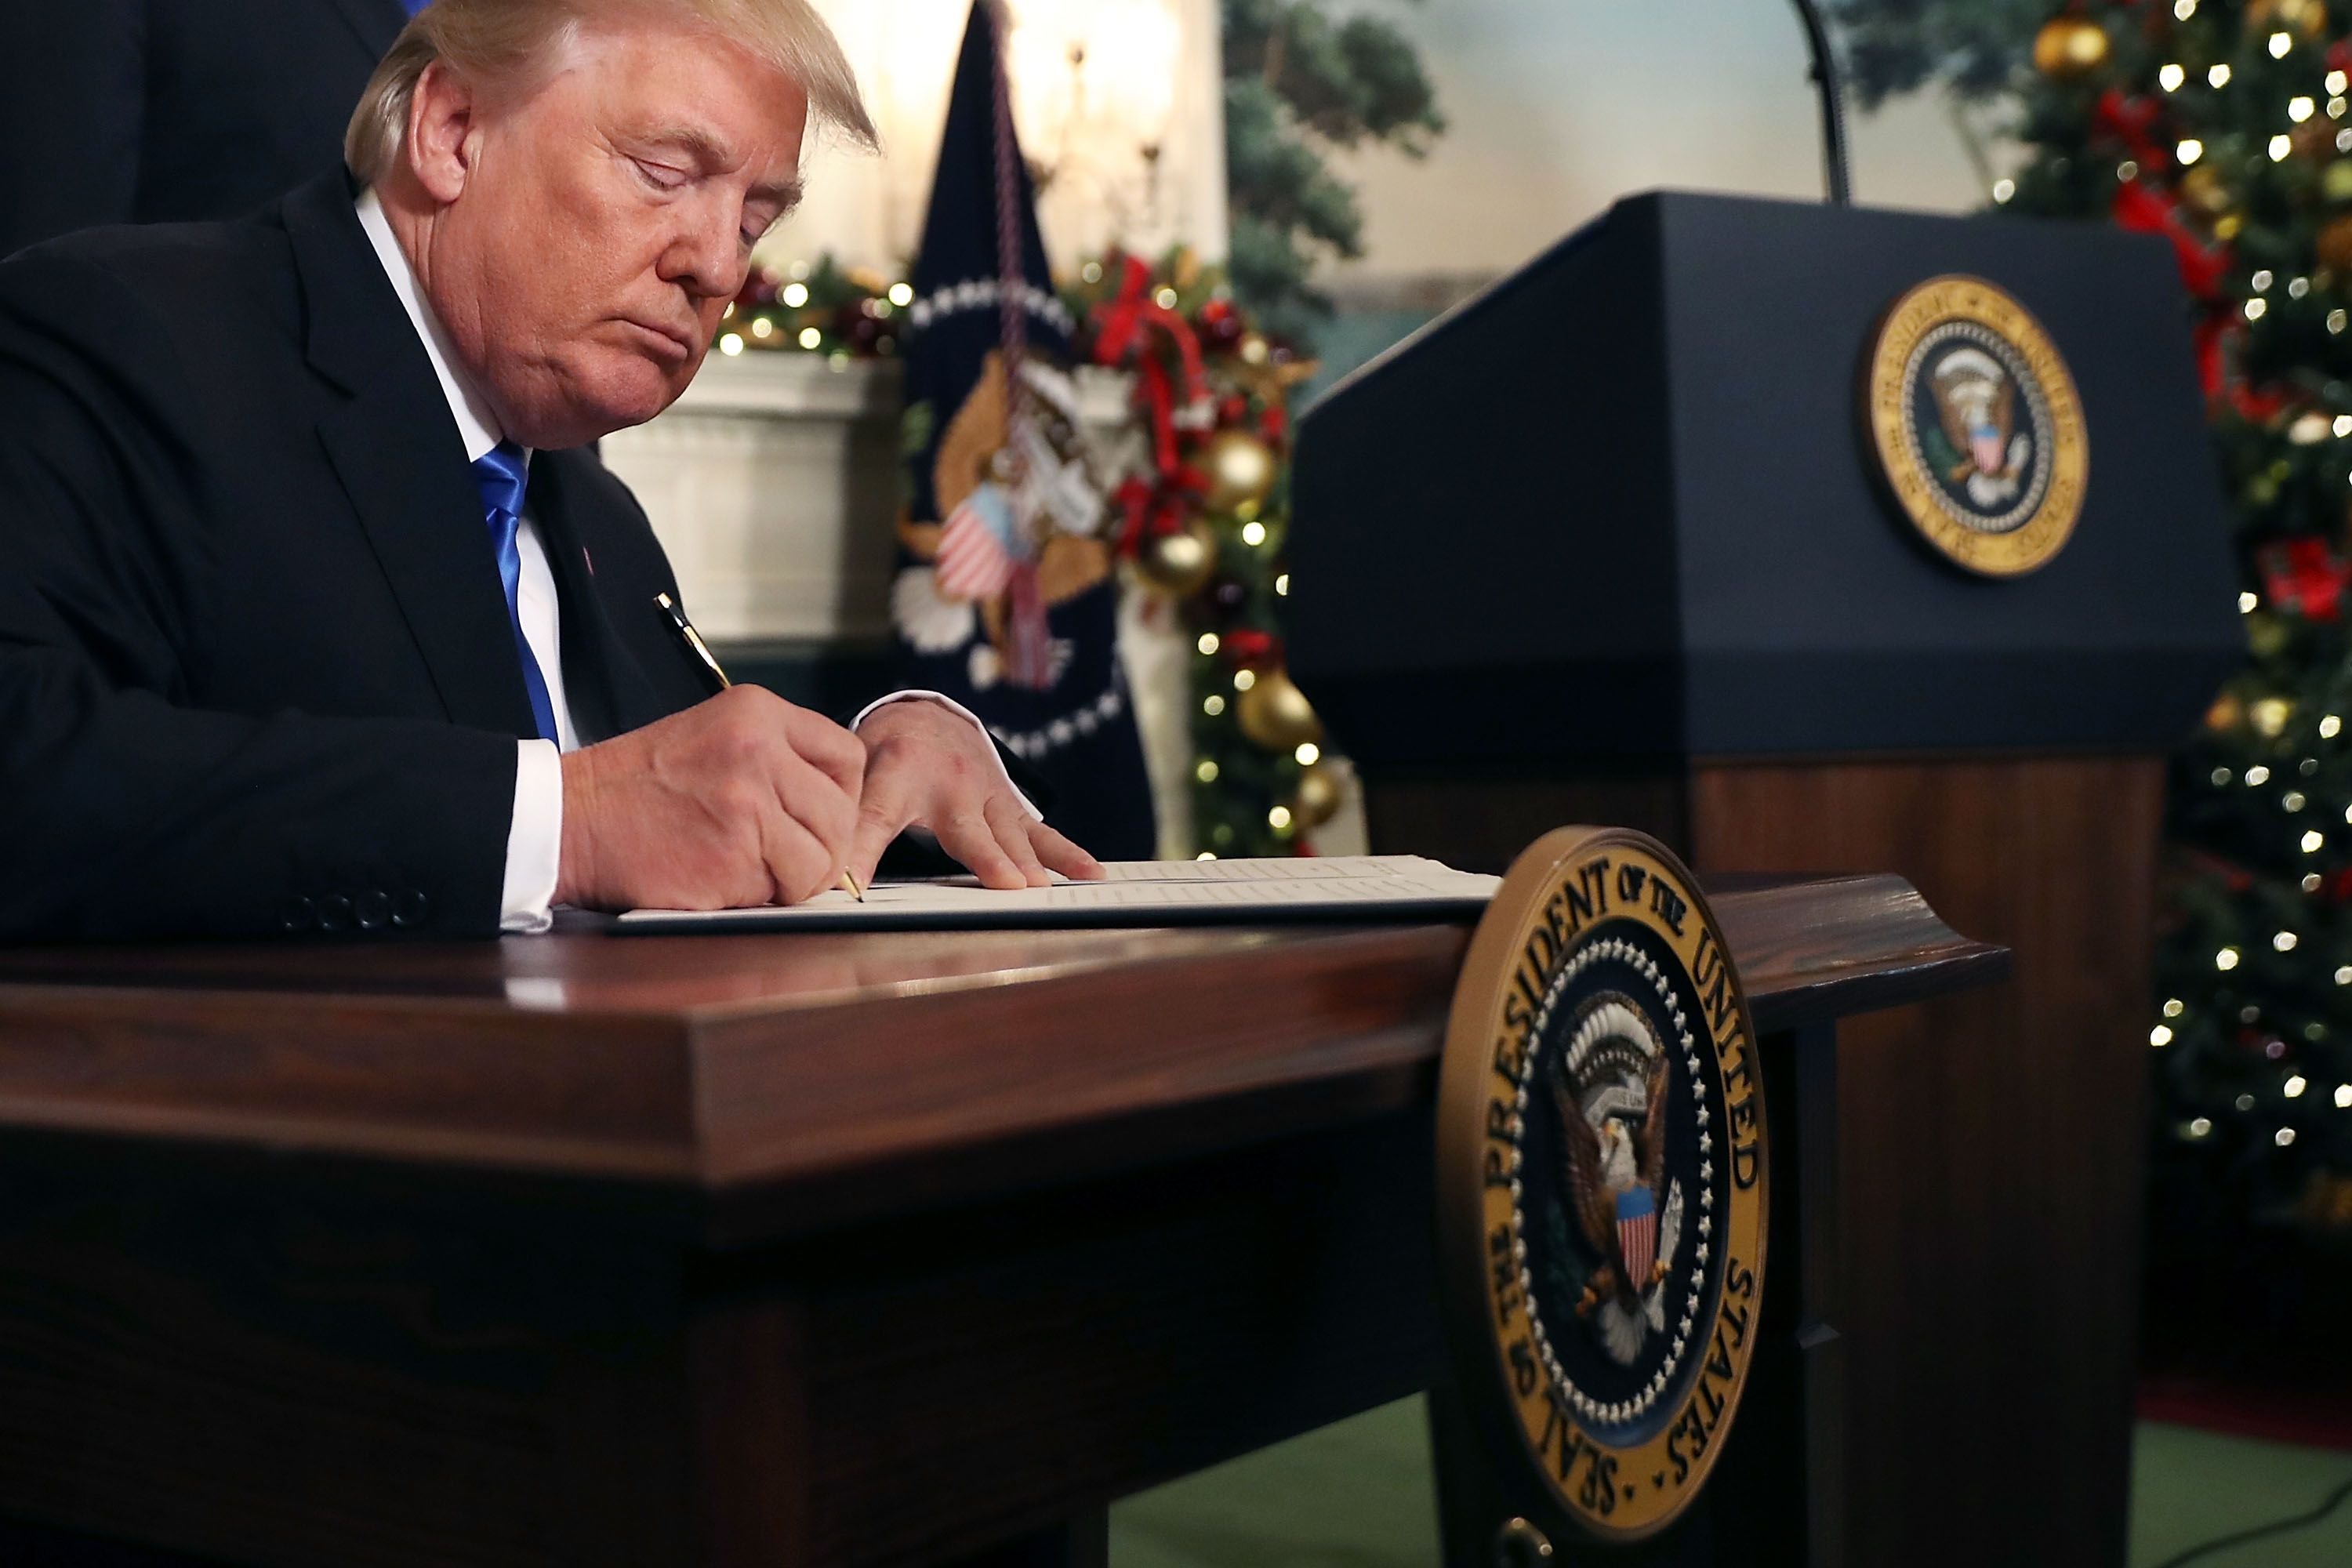 President Trump Signs Executive Order Declaring Christmas Eve A Federal